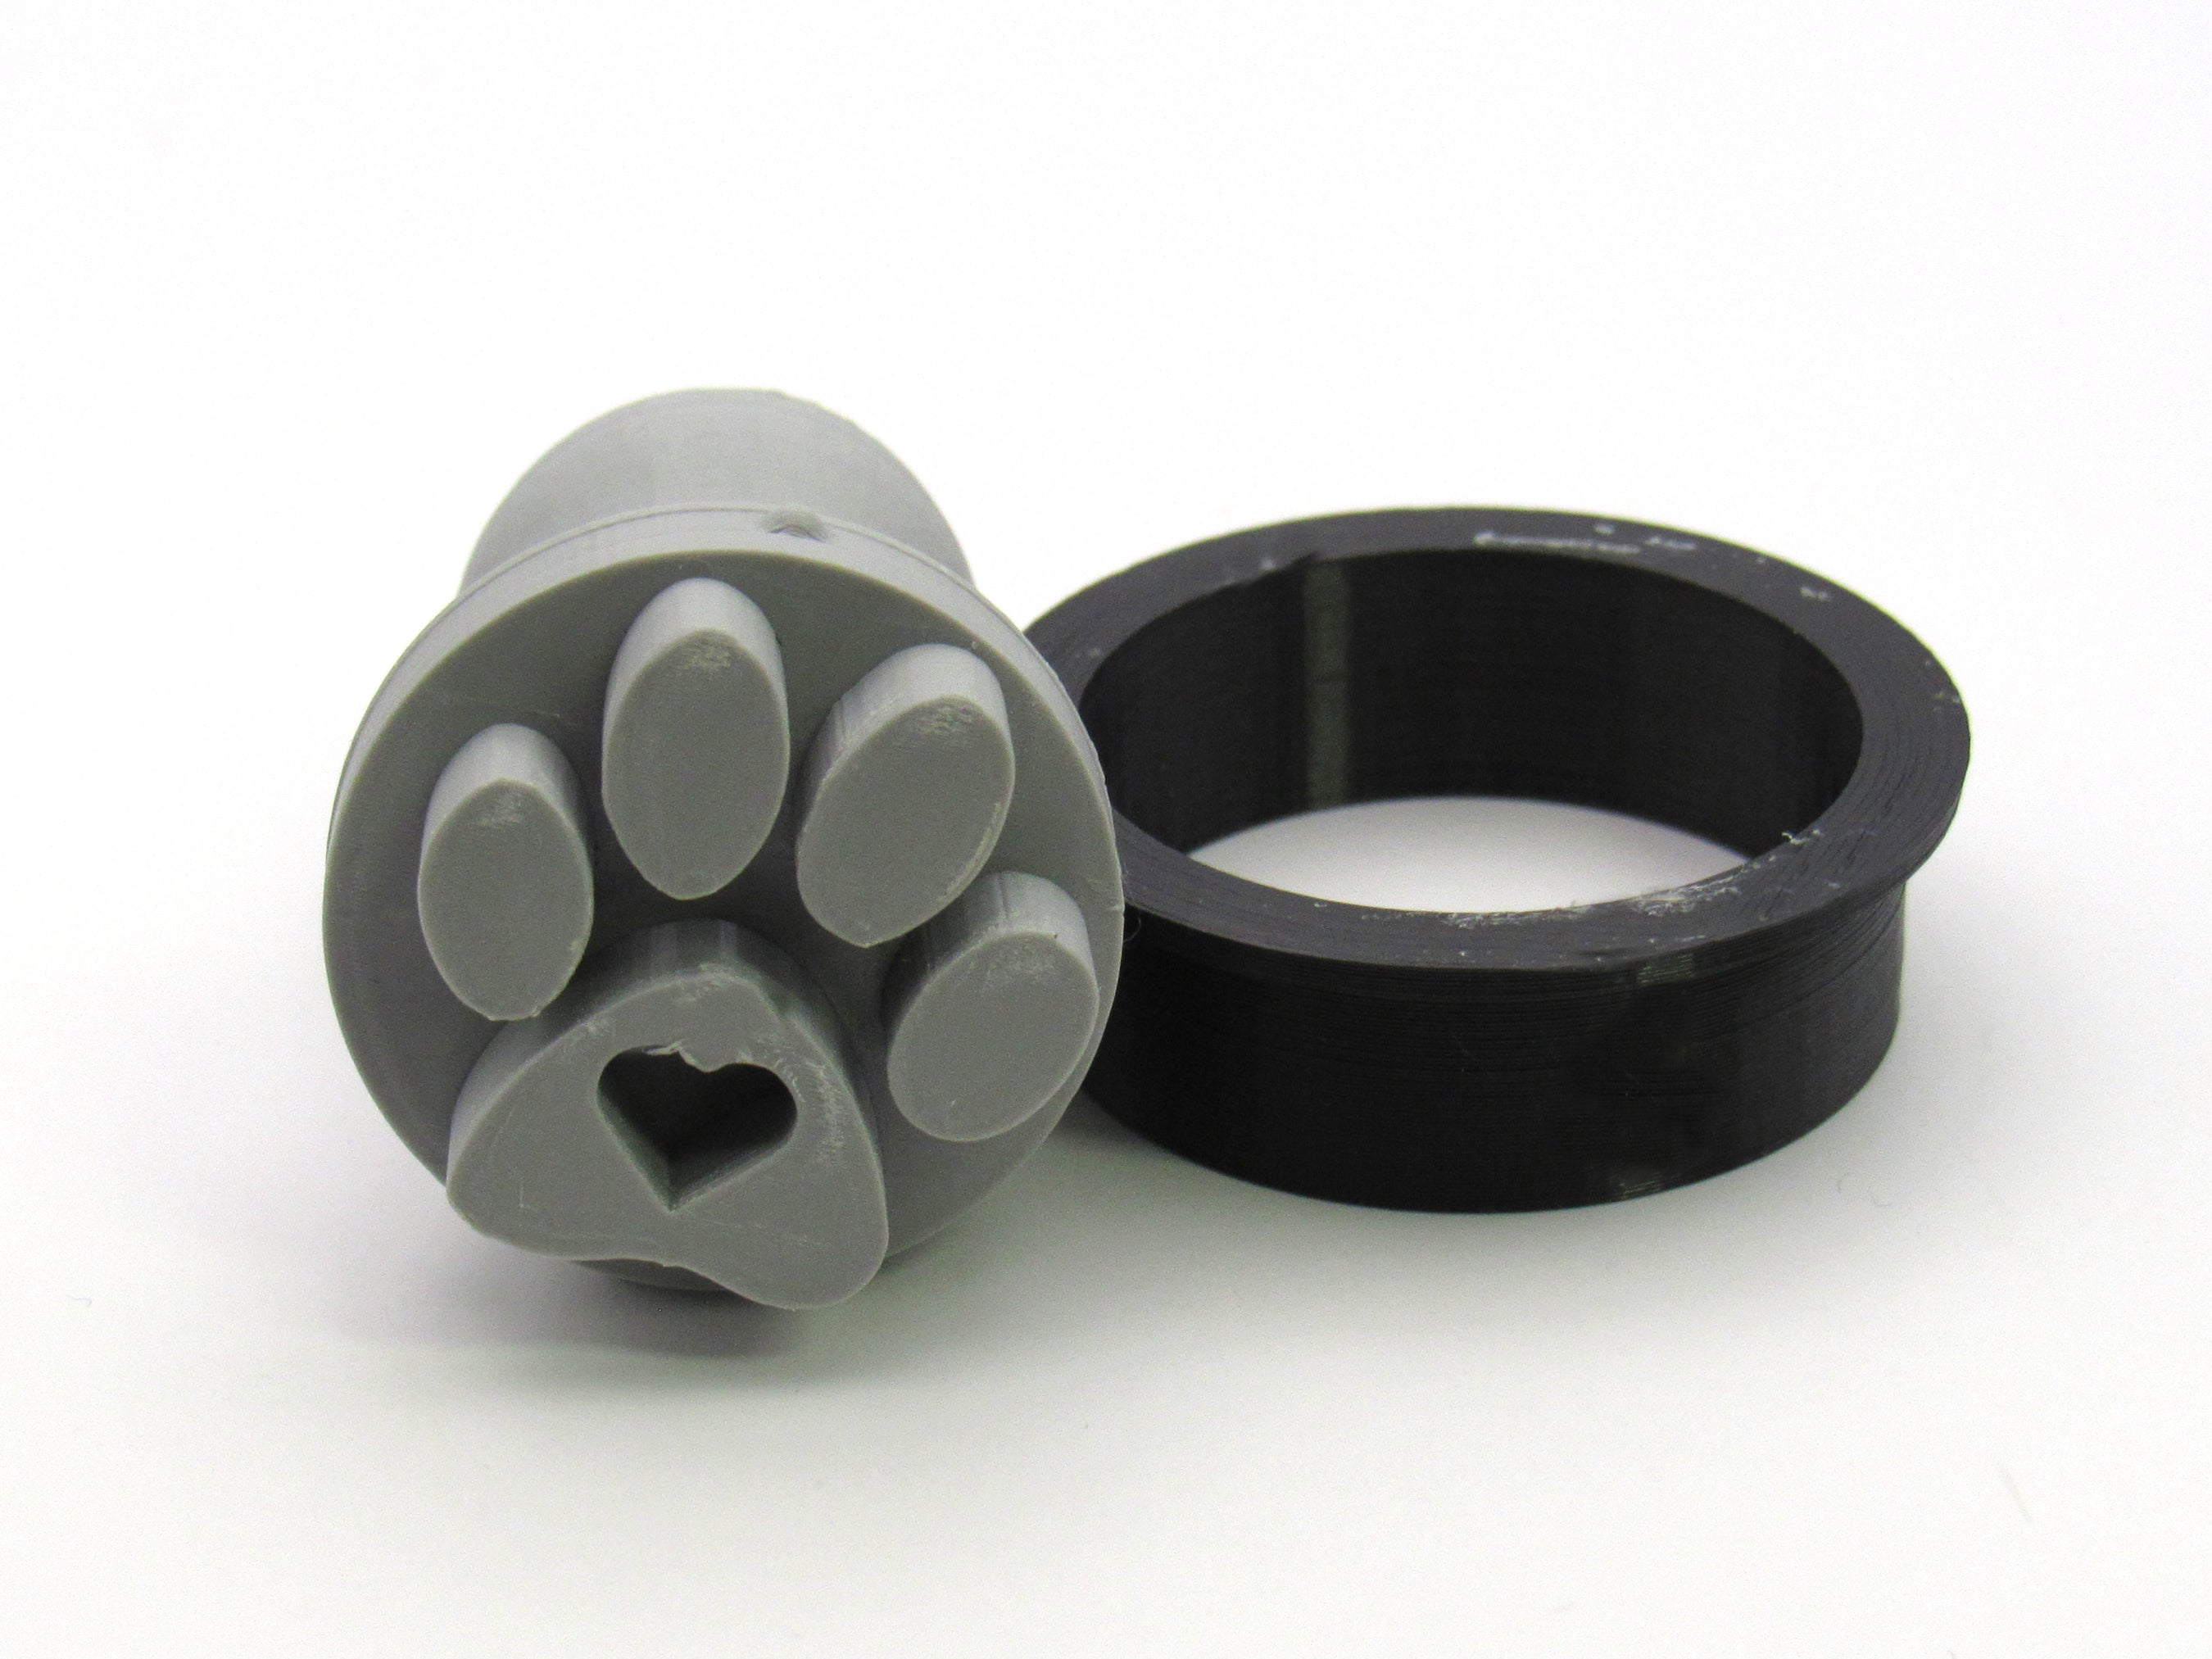 Paw Print with Heart - round pendant stamp with cutter Round pendant - A Mayes Pottery